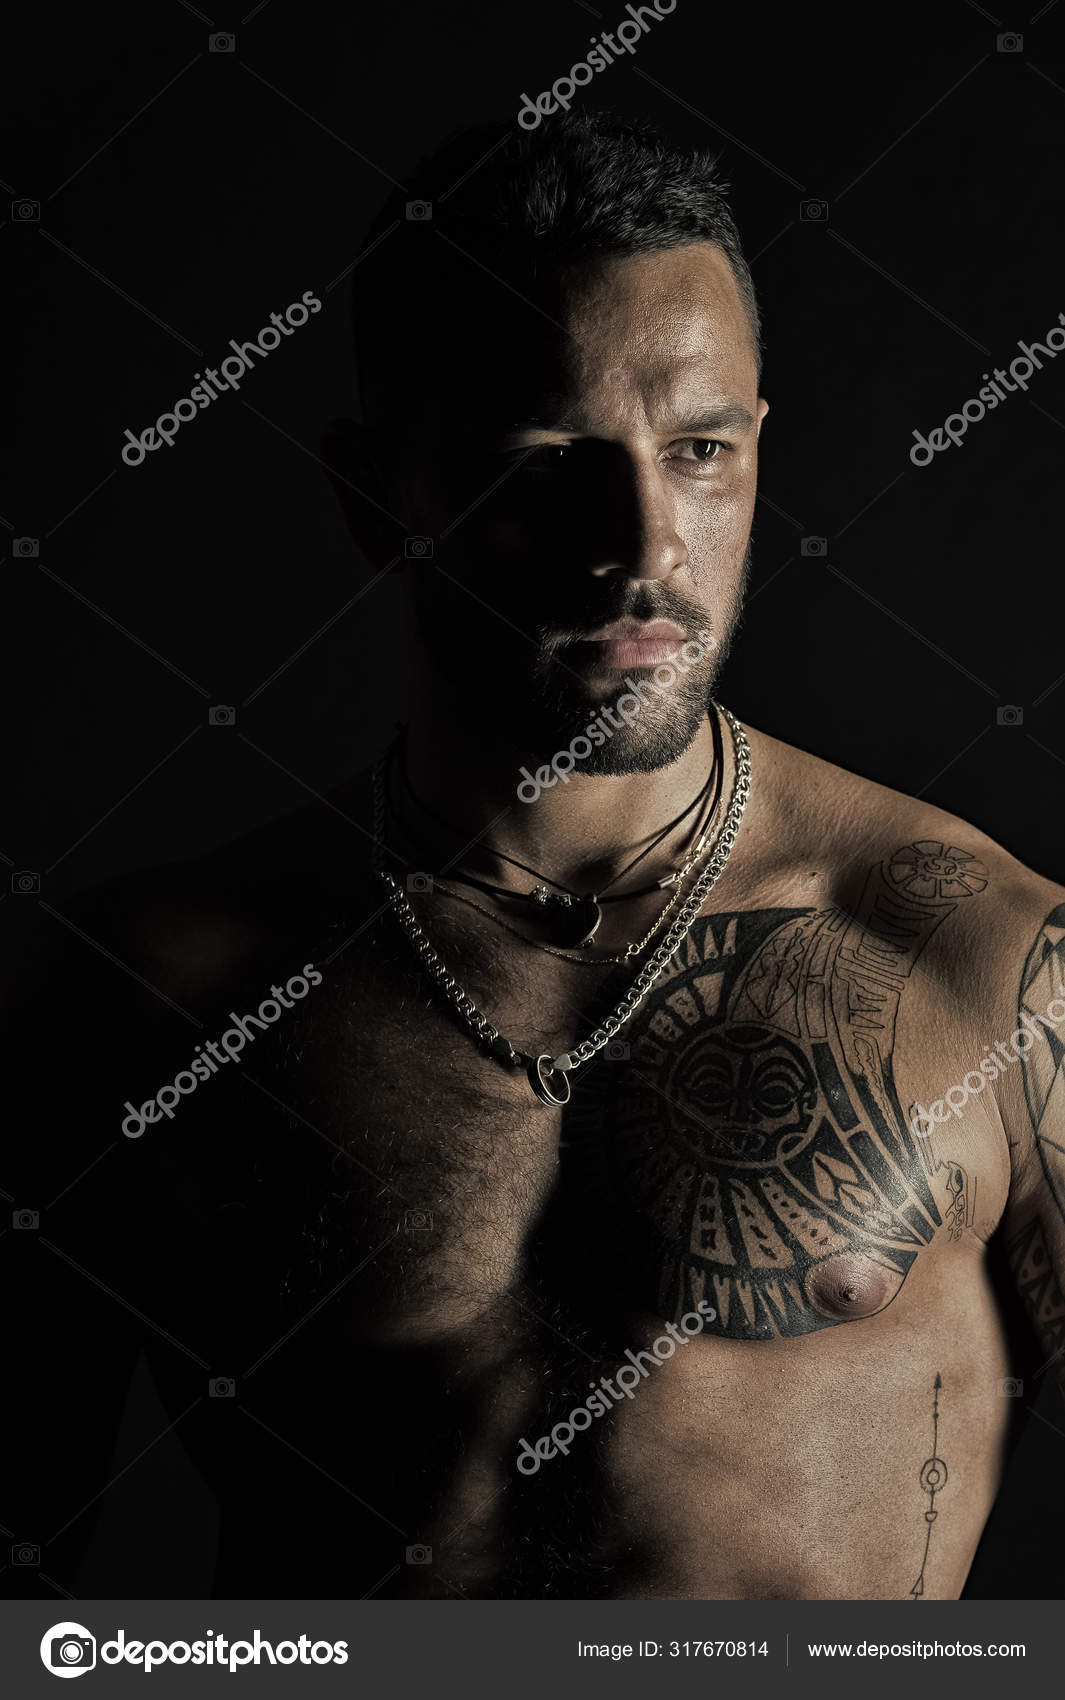 Fit model with tattoo design on skin. Bearded man with tattooed chest. Man  with sexy muscular torso. Sportsman or athlete with stylish beard and hair.  Bodycare or wellness and sport, vintage filter